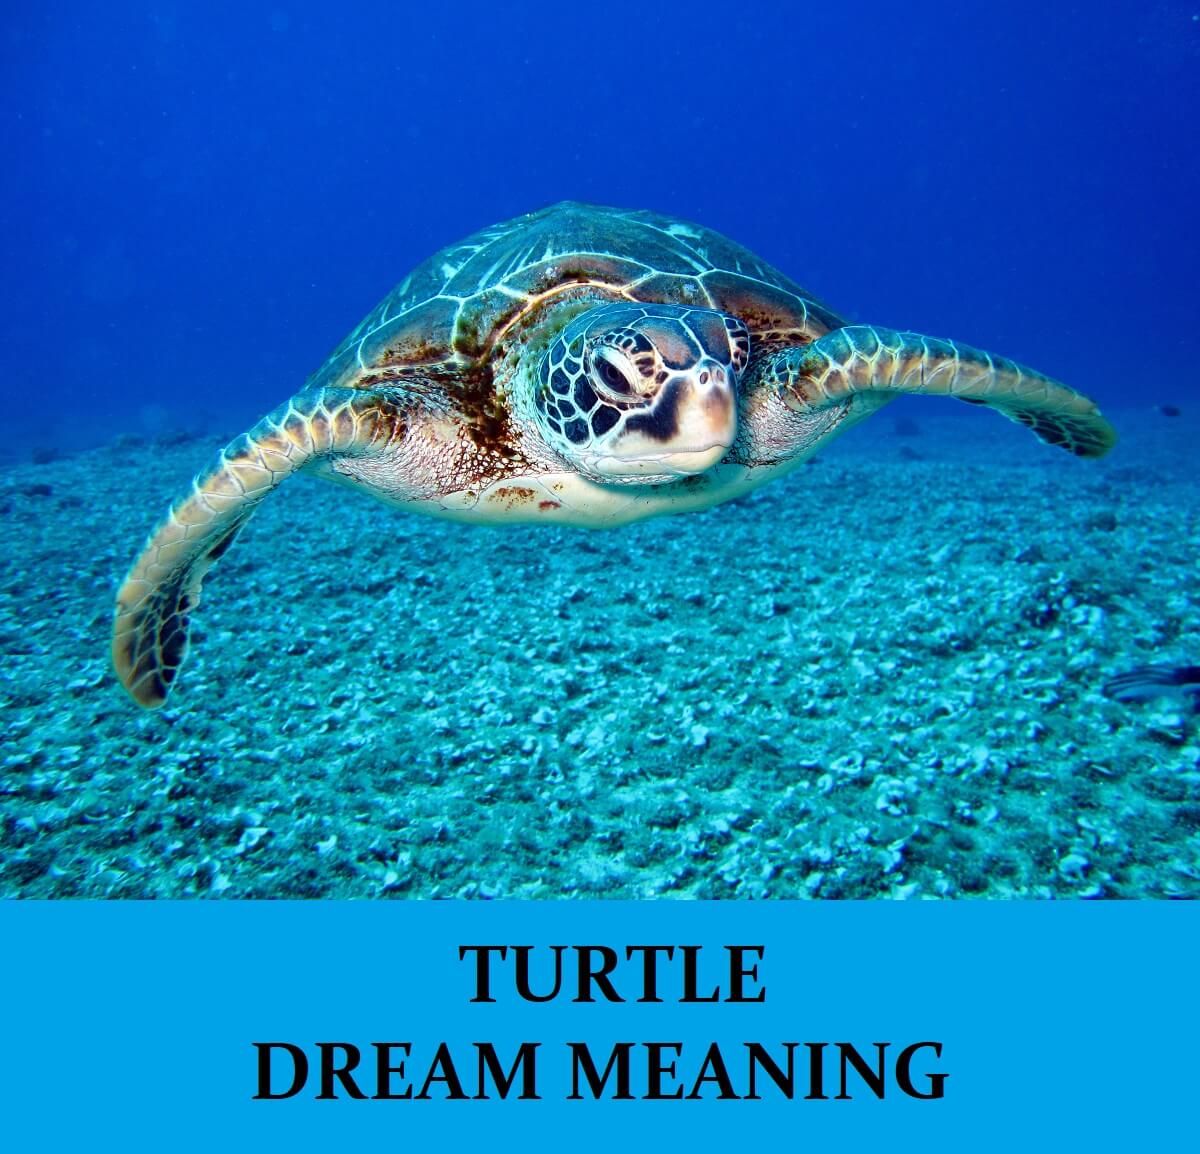 Dream About Turtles